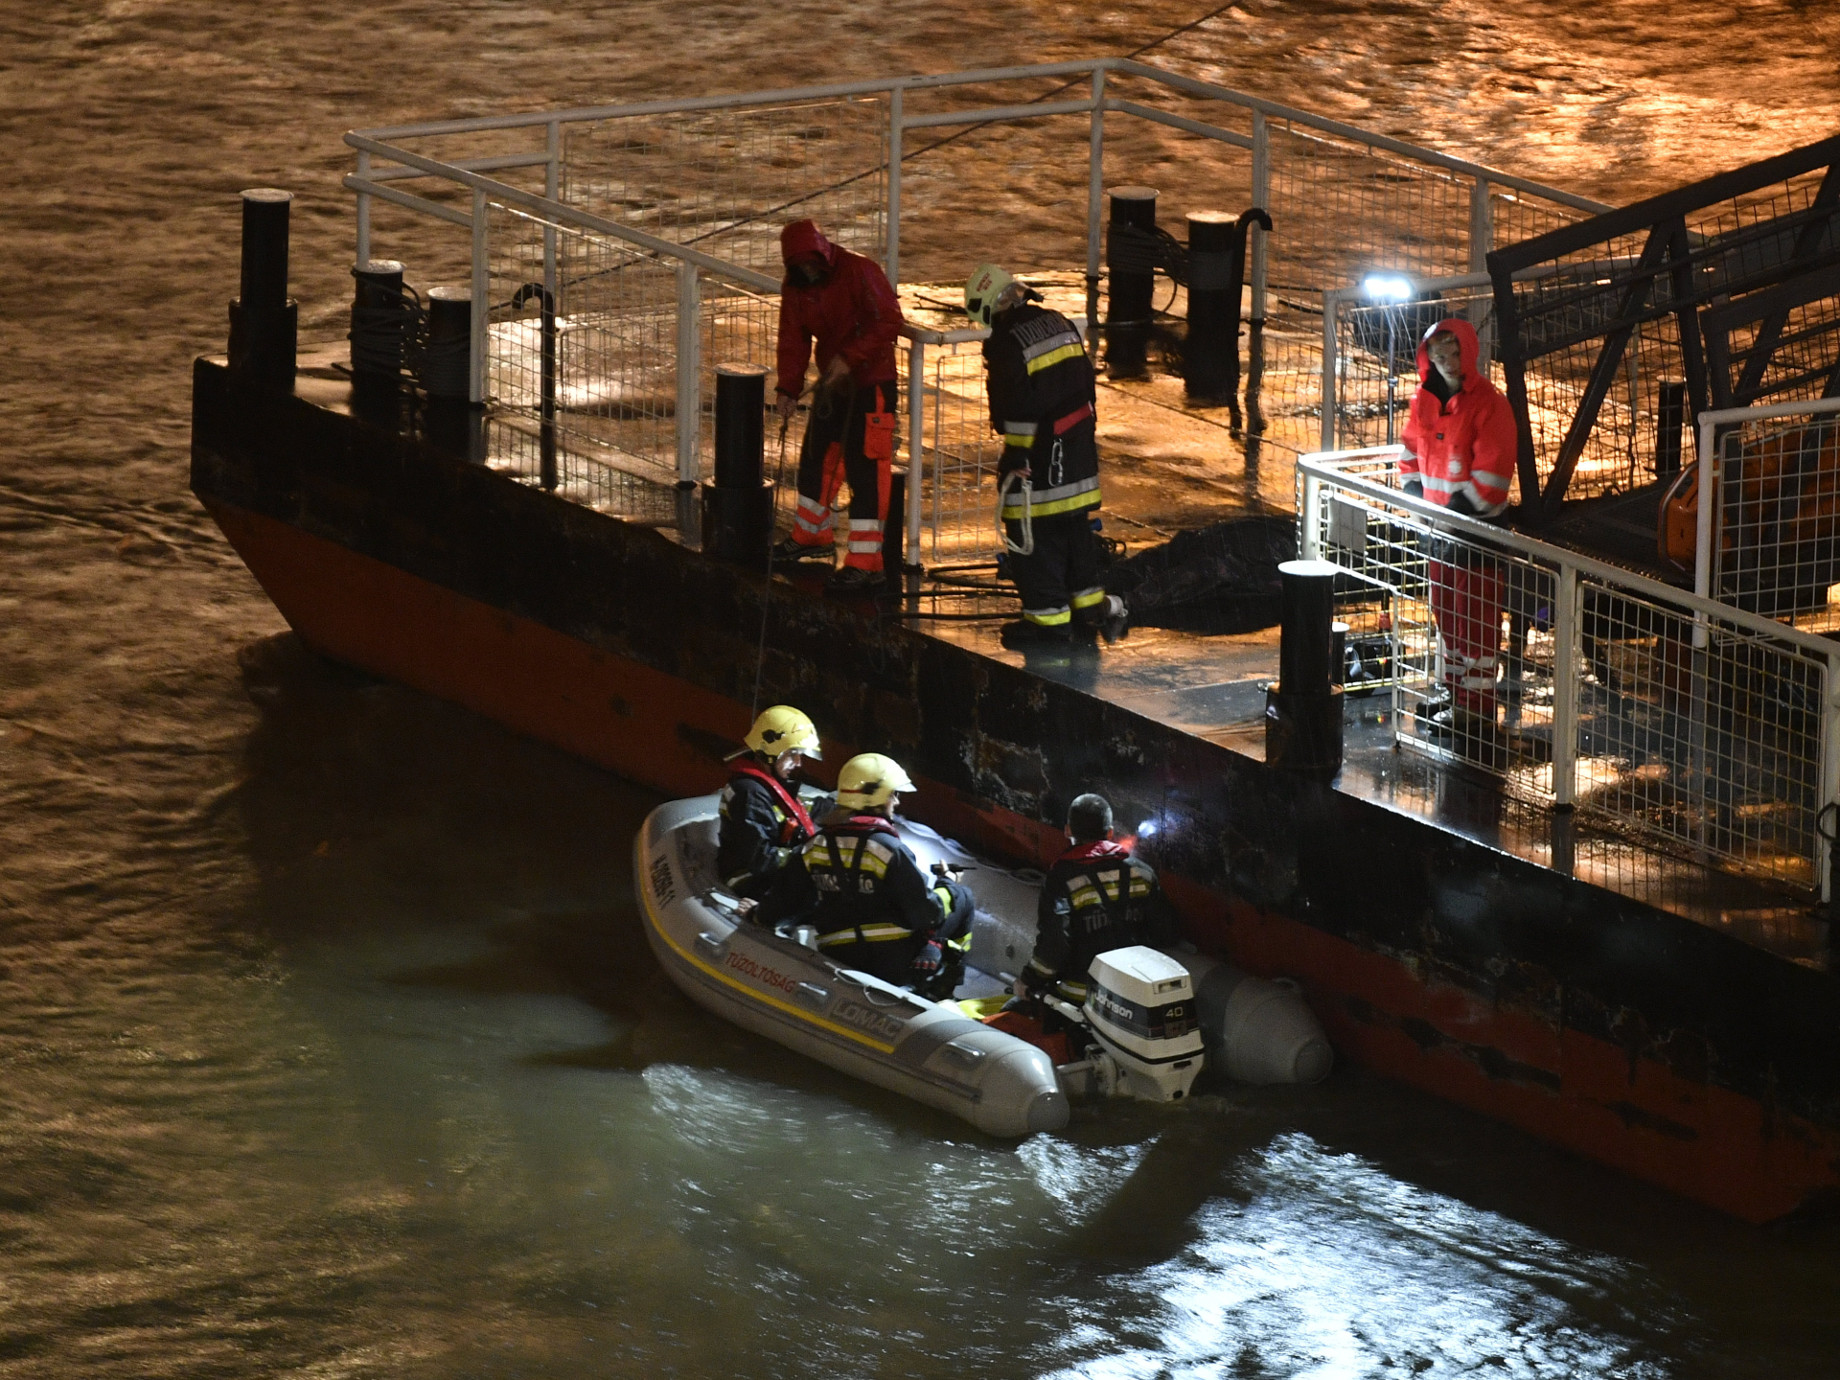 Video: Budapest Boat Tragedy - Divers In Action, Body Found 100km From Accident